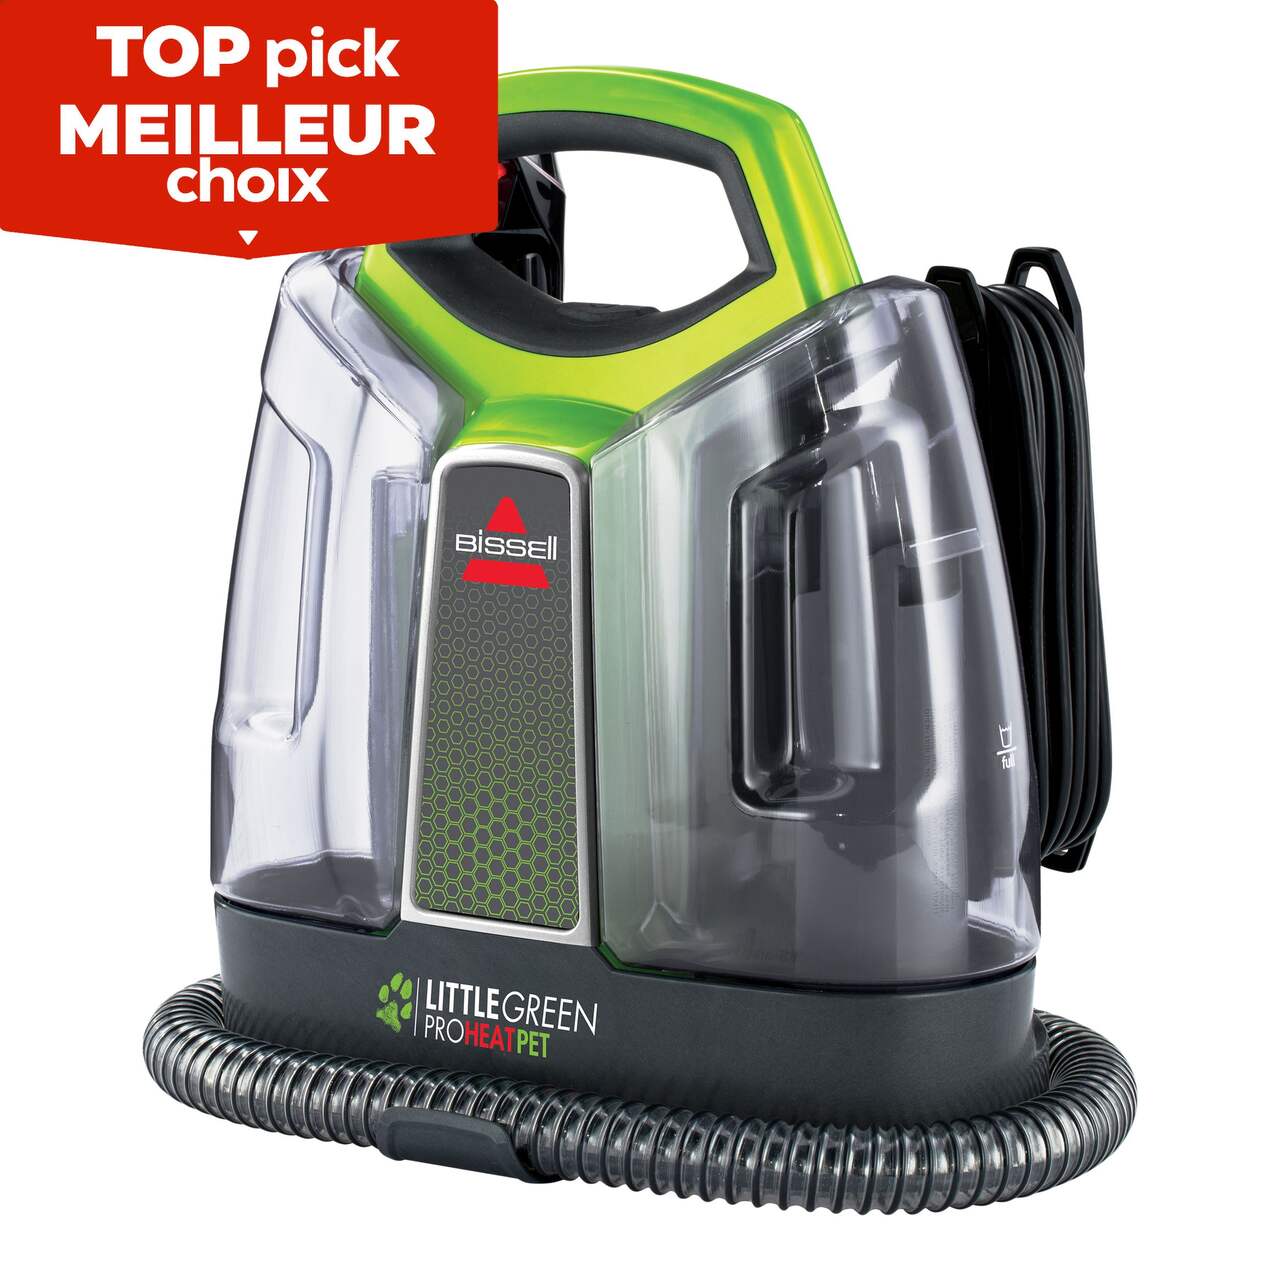 https://media-www.canadiantire.ca/product/living/cleaning/vacuums-and-floorcare/0436962/bissell-little-green-pro-heat-pet-c18d00b9-a5e3-45d2-b13d-b20218ce9a00-jpgrendition.jpg?imdensity=1&imwidth=640&impolicy=mZoom